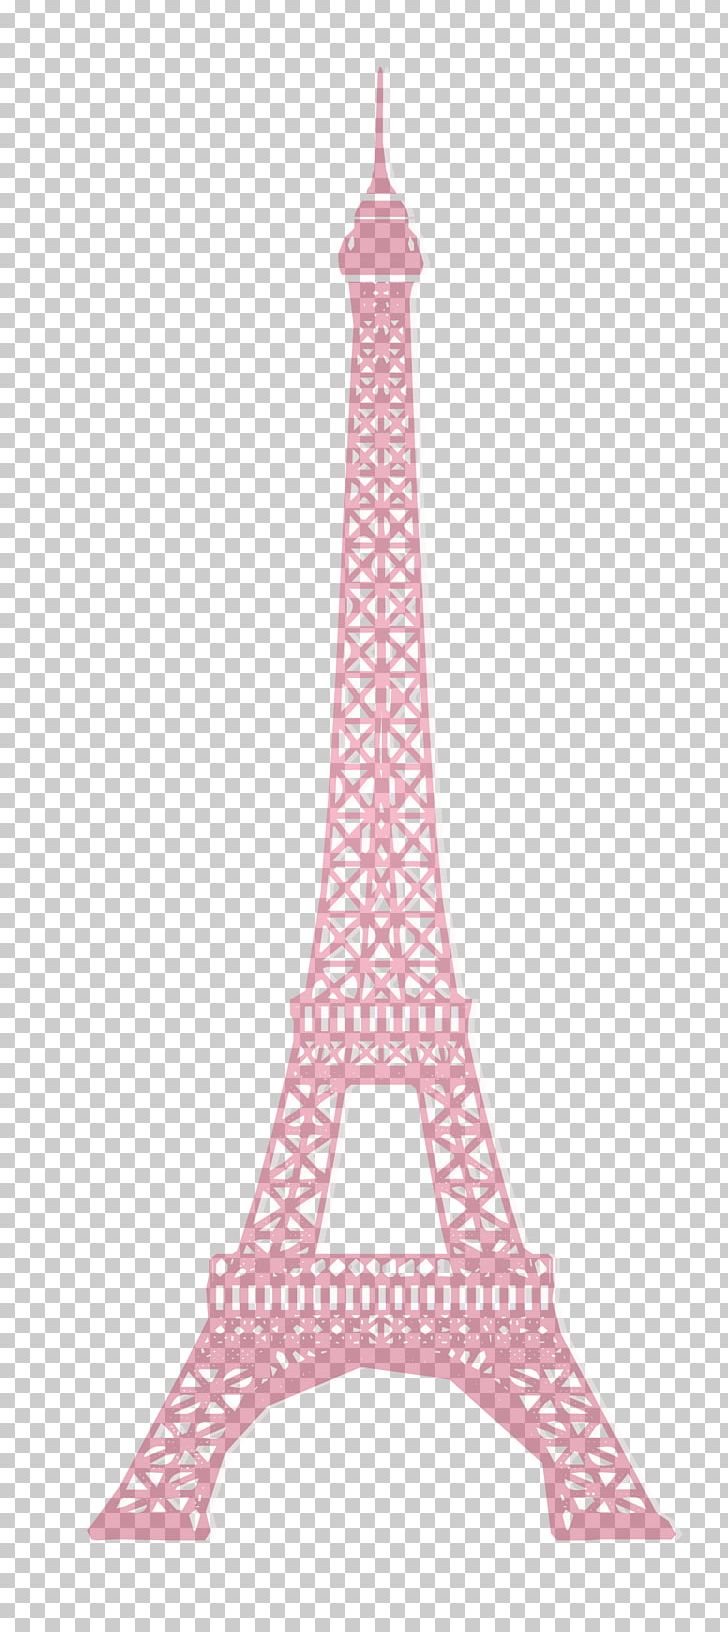 Eiffel Tower Silhouette PNG, Clipart, Bouquet, Building, Business People, Coloring Book, Decorative Patterns Free PNG Download